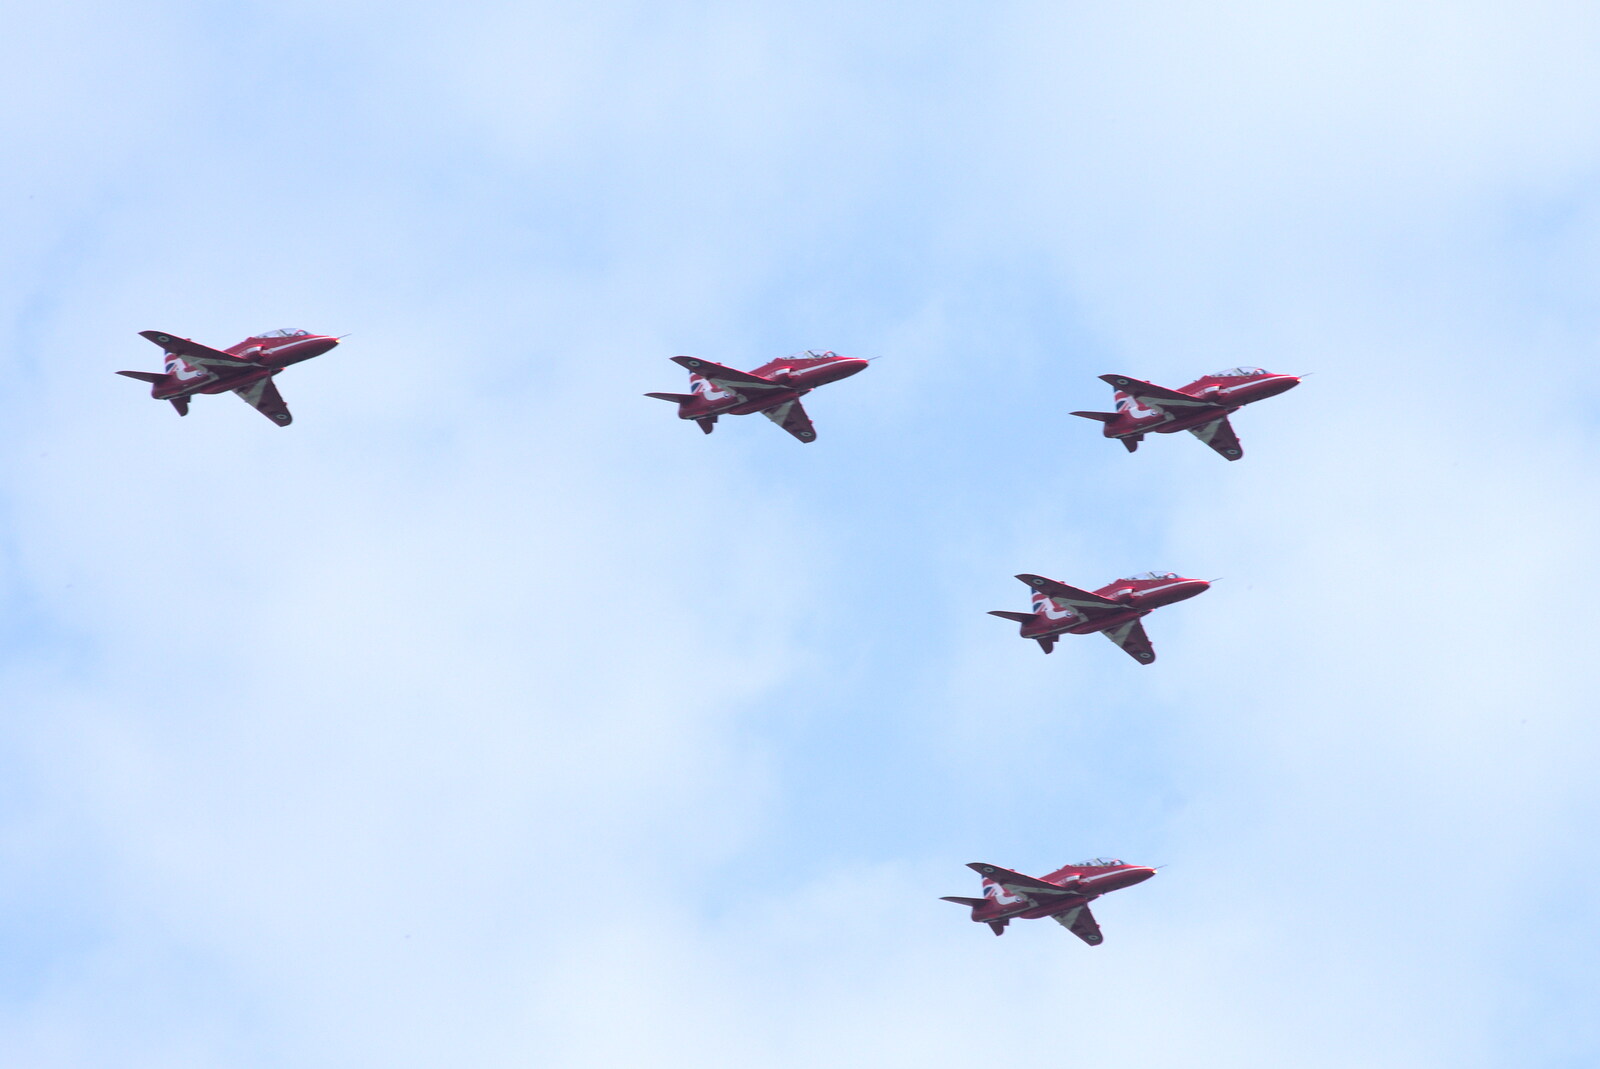 The first five Red Arrows fly over low from Pin-hole Cameras and a Red Arrows Flypast, Brome, Suffolk - 8th May 2020